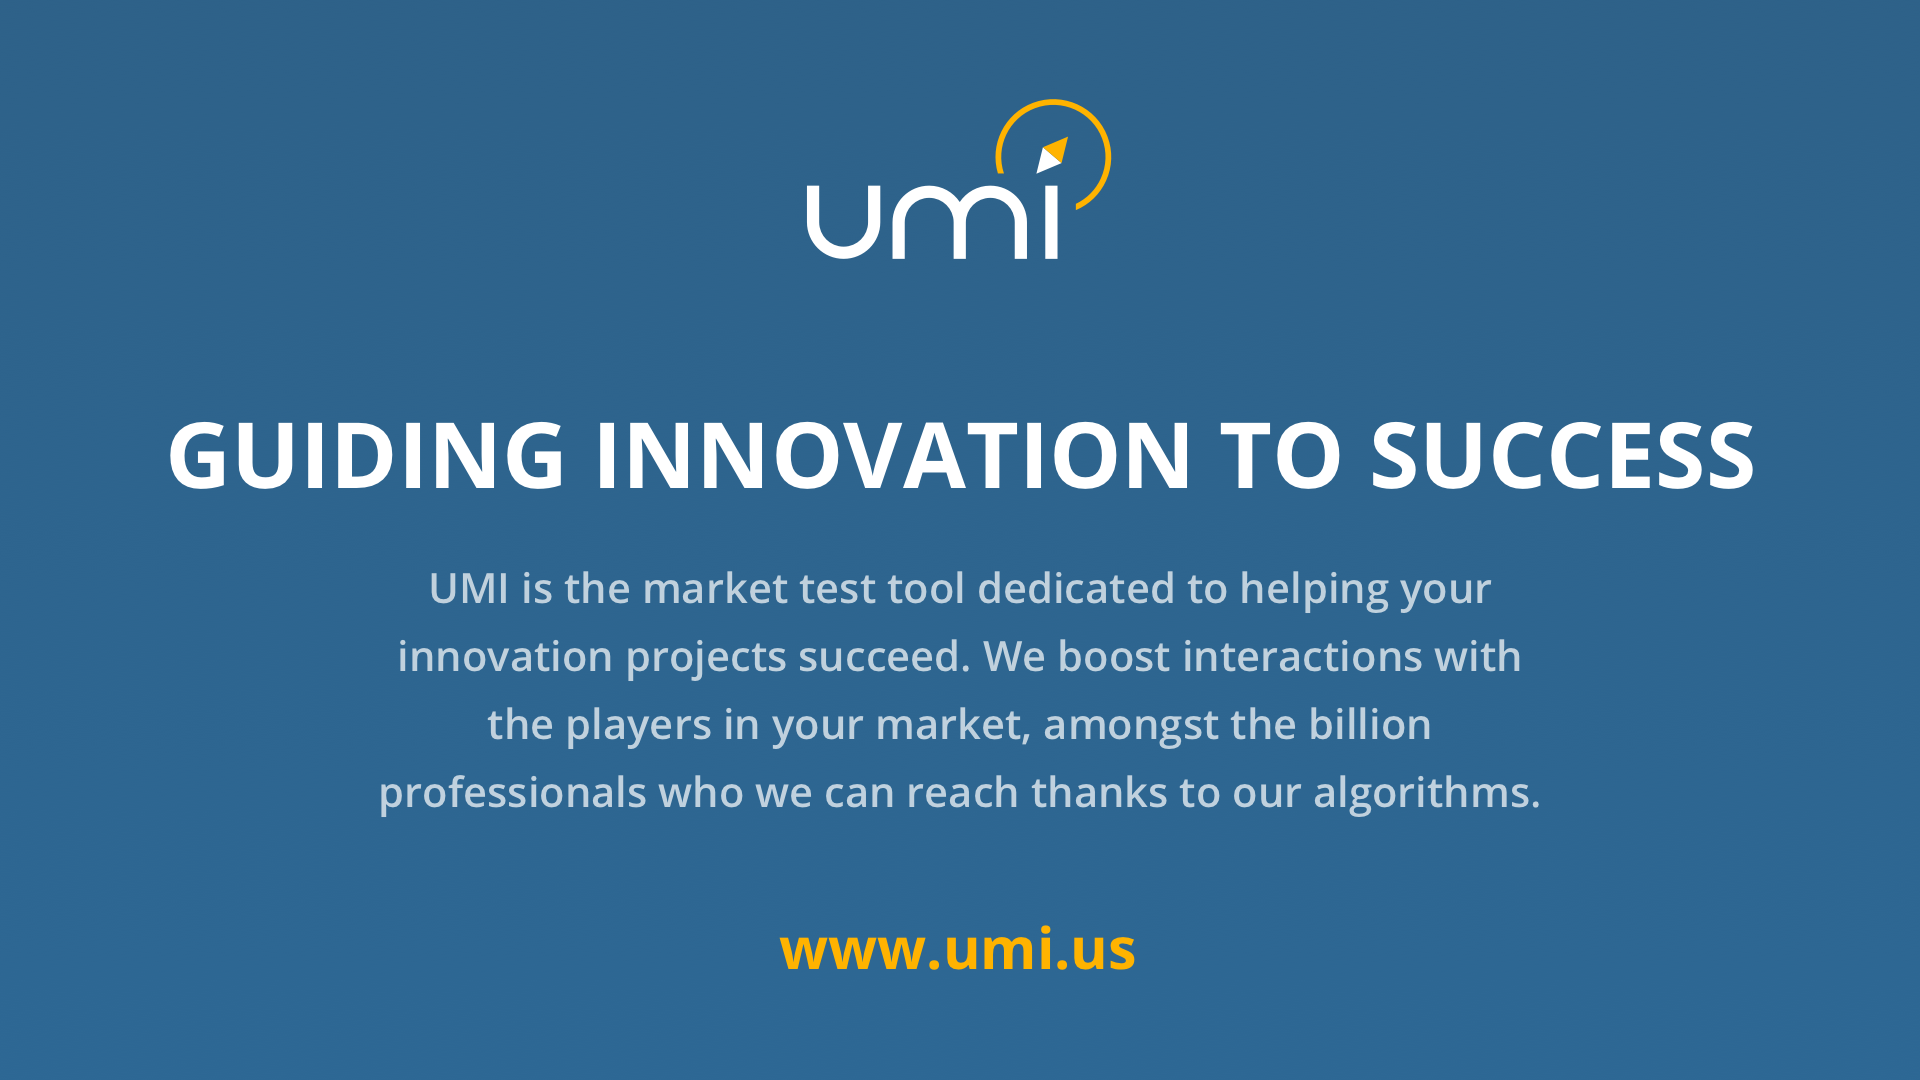 The Market Test tool for your innovation projects - UMI